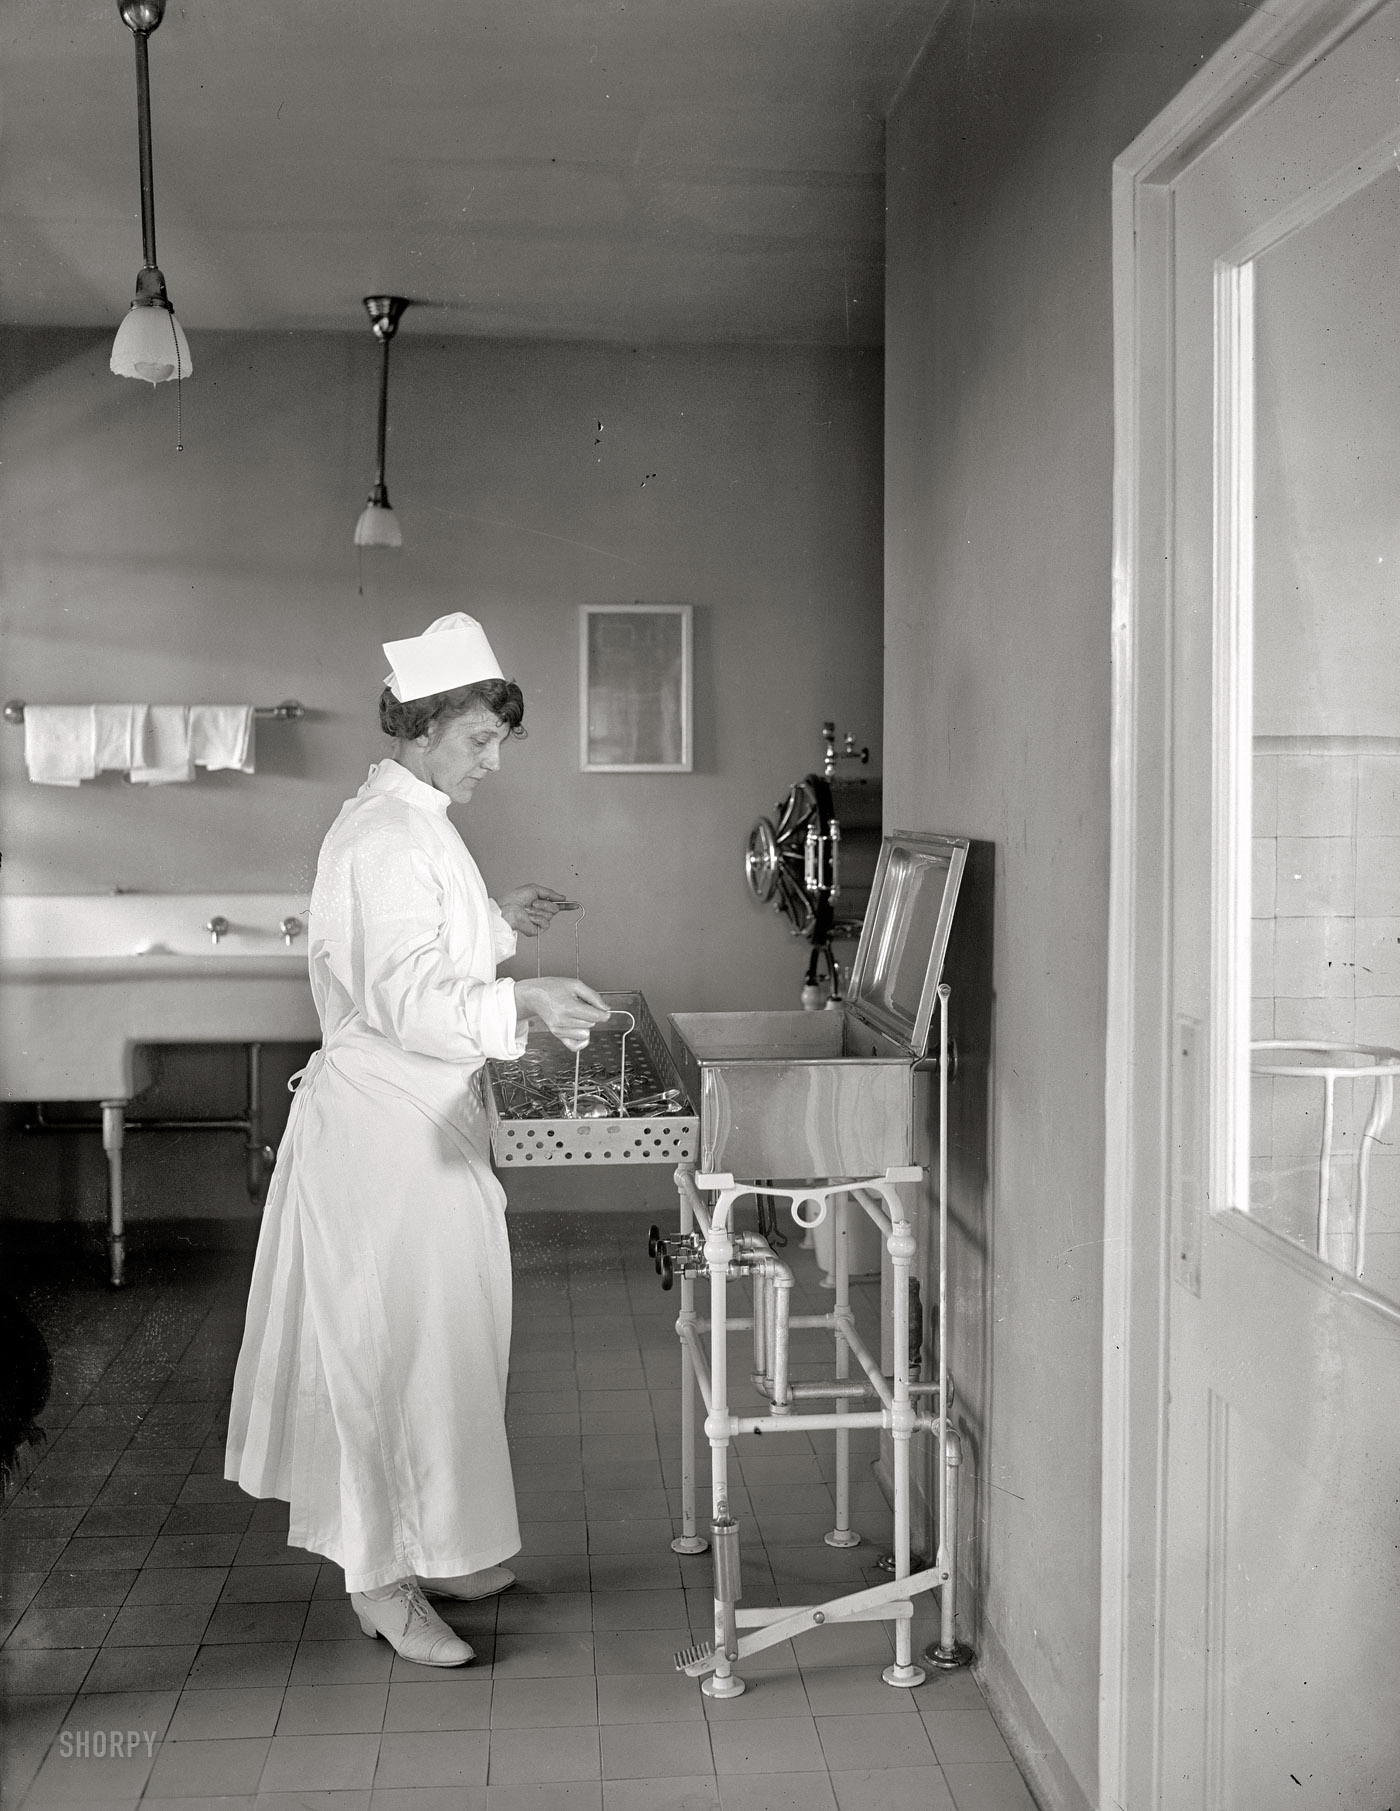 "Nurse, 1922." National Photo Co. Collection glass negative. View full size.